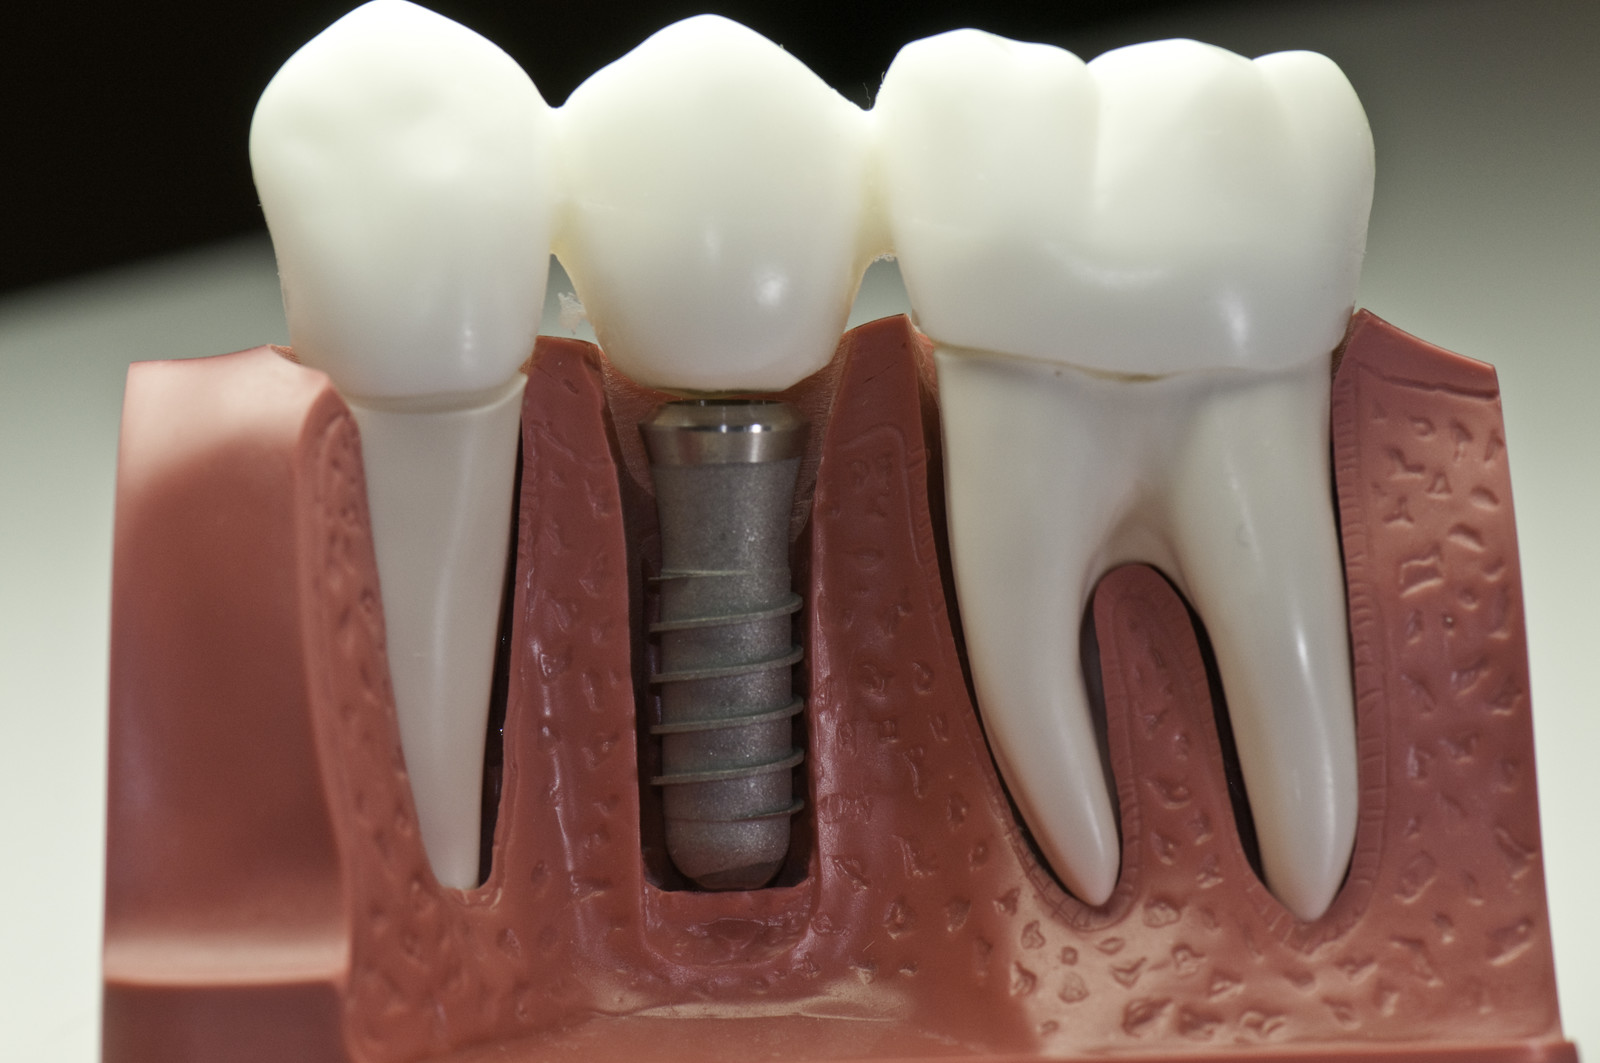 everything you need to know about dental implants